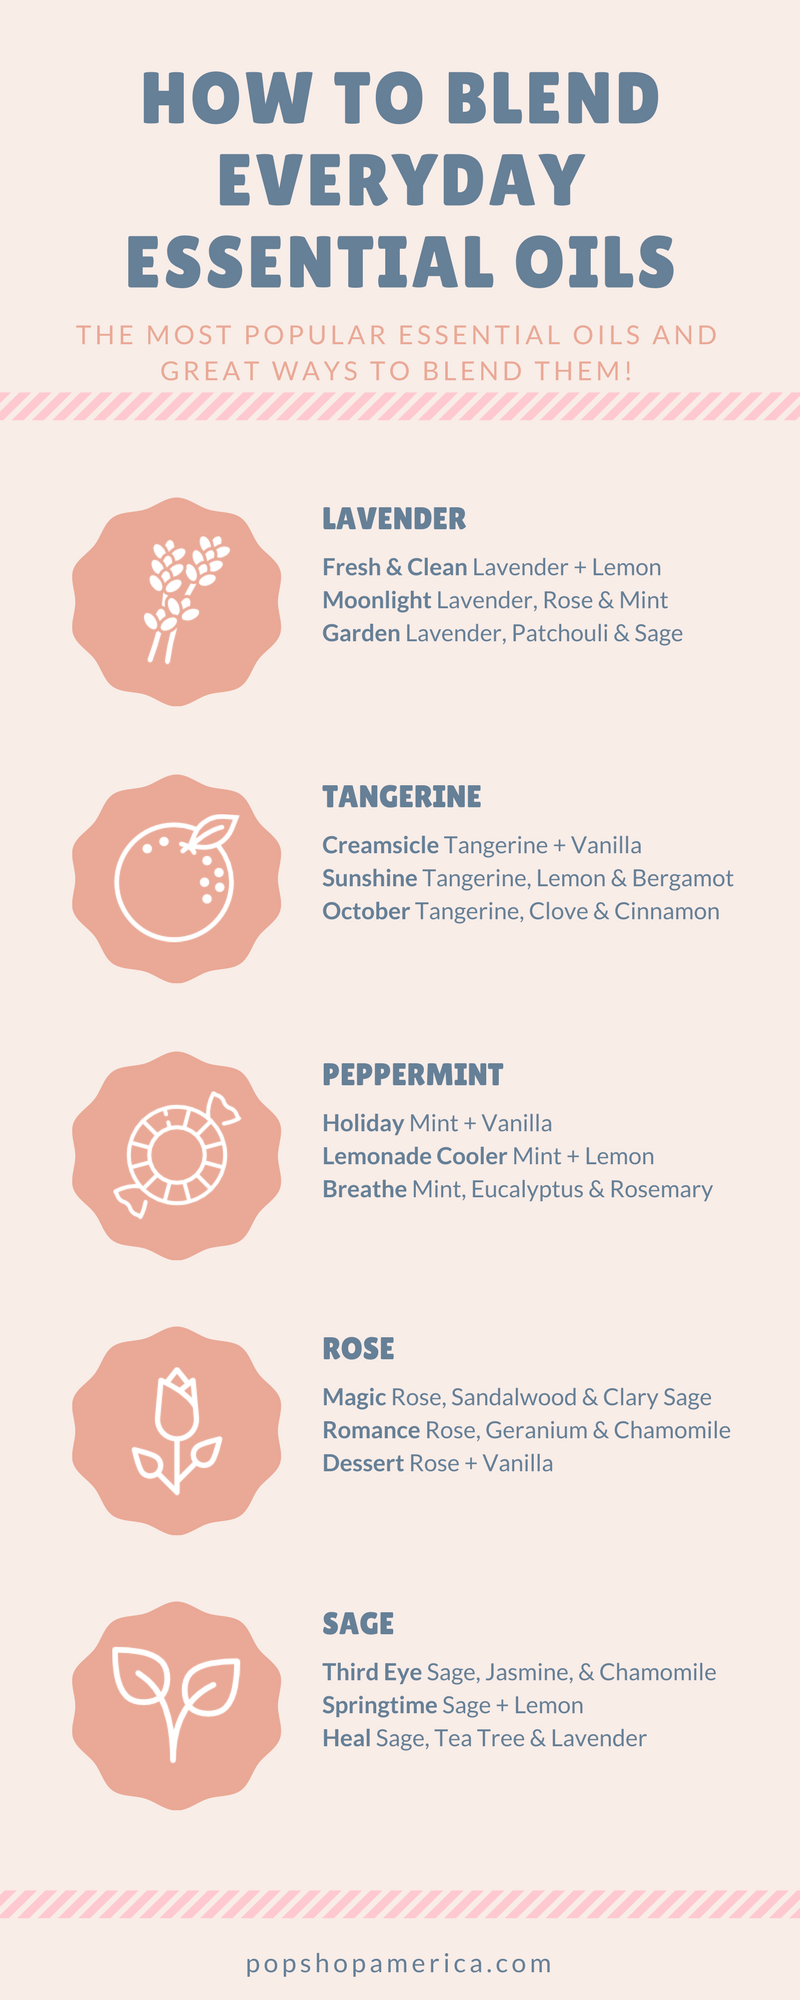 How to Blend Everyday Essential Oils with 15+ Recipes